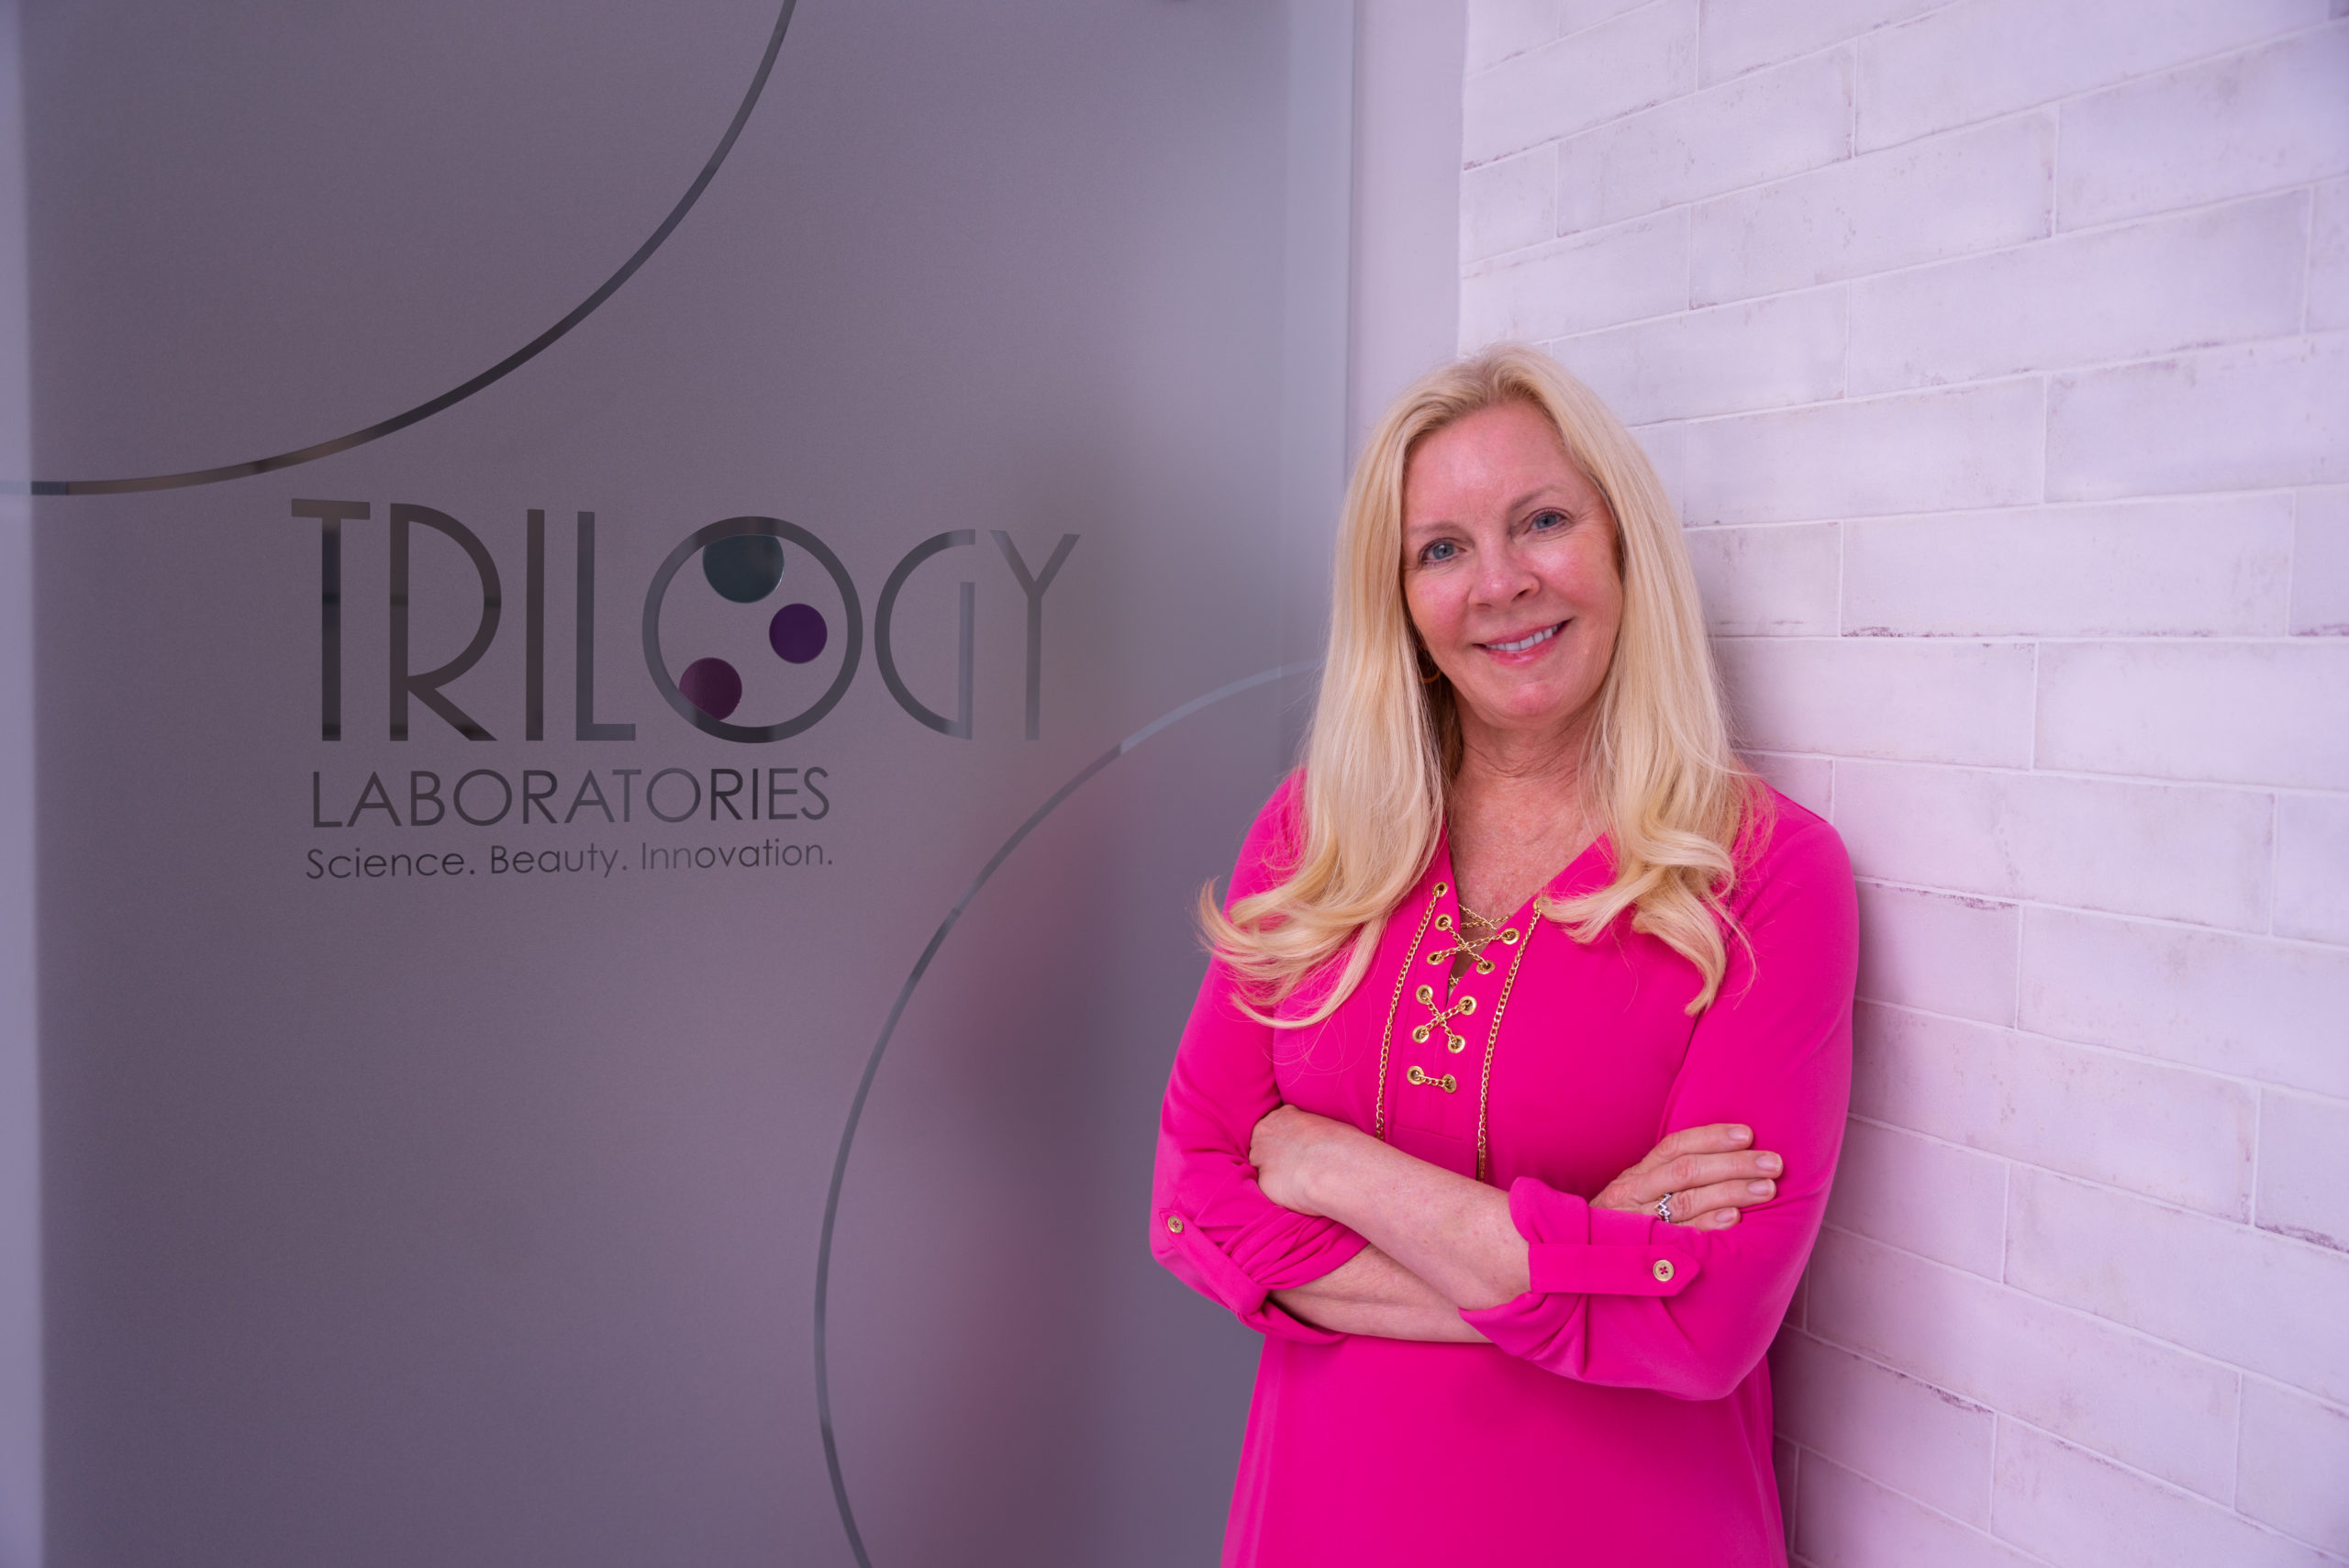 Trilogy skin care company completes south Fort Myers expansion 208grill